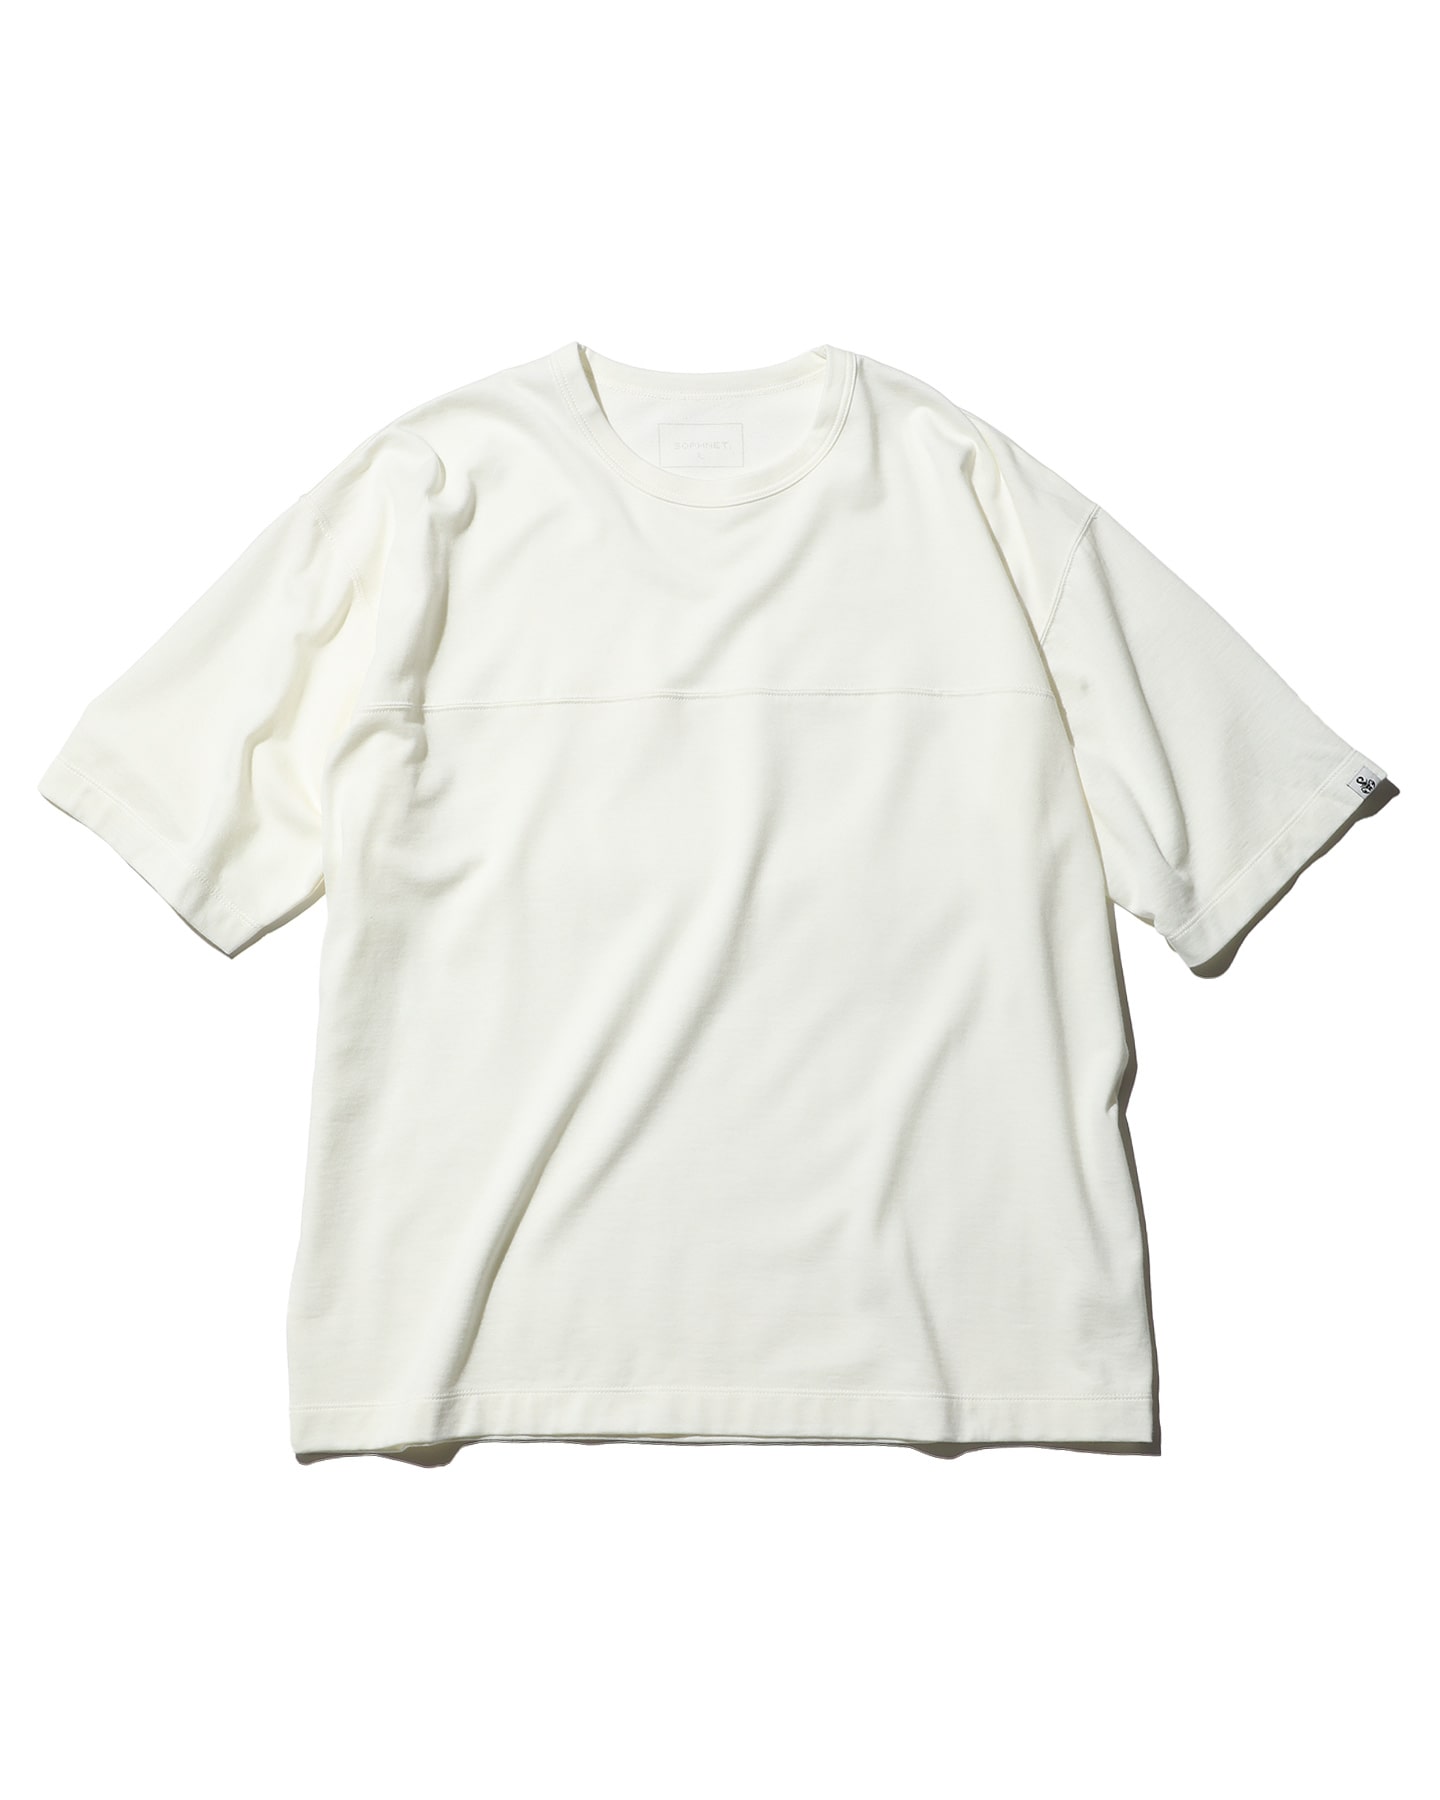 SOPH. | S/S WIDE FOOTBALL TEE(XL OFF WHITE):